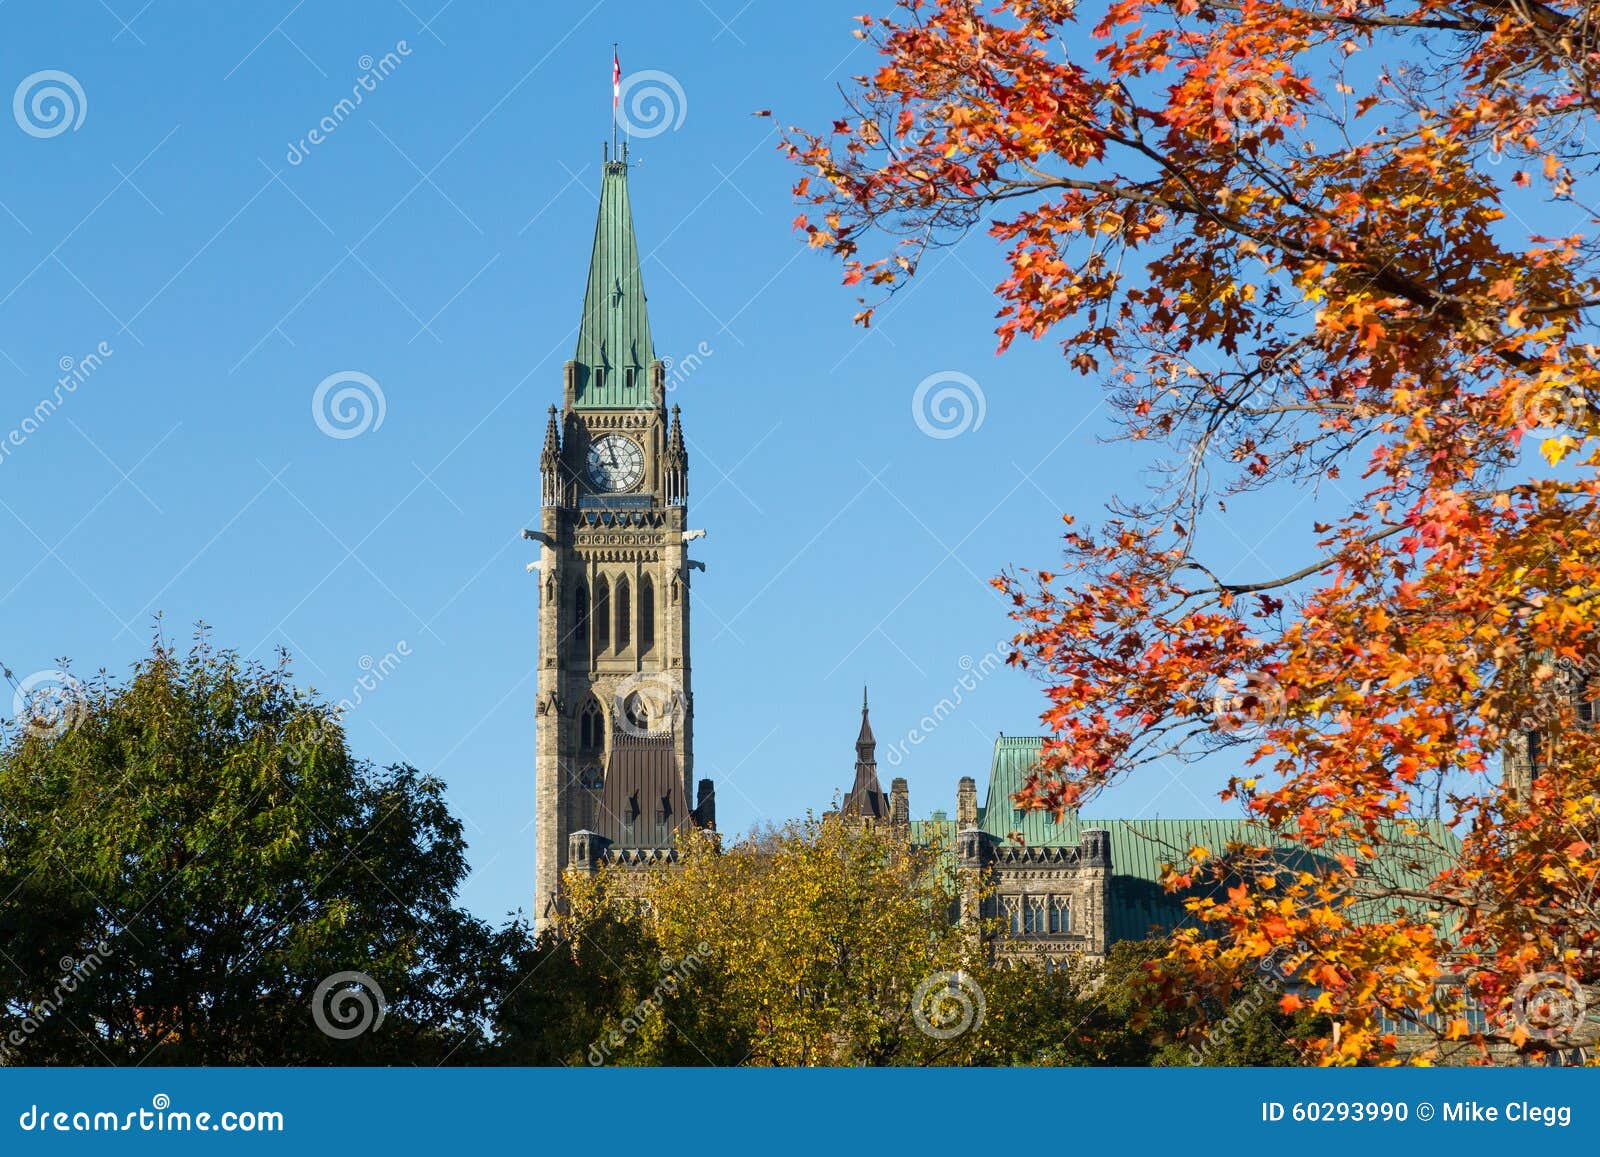 part of the ottawa parliament buildings